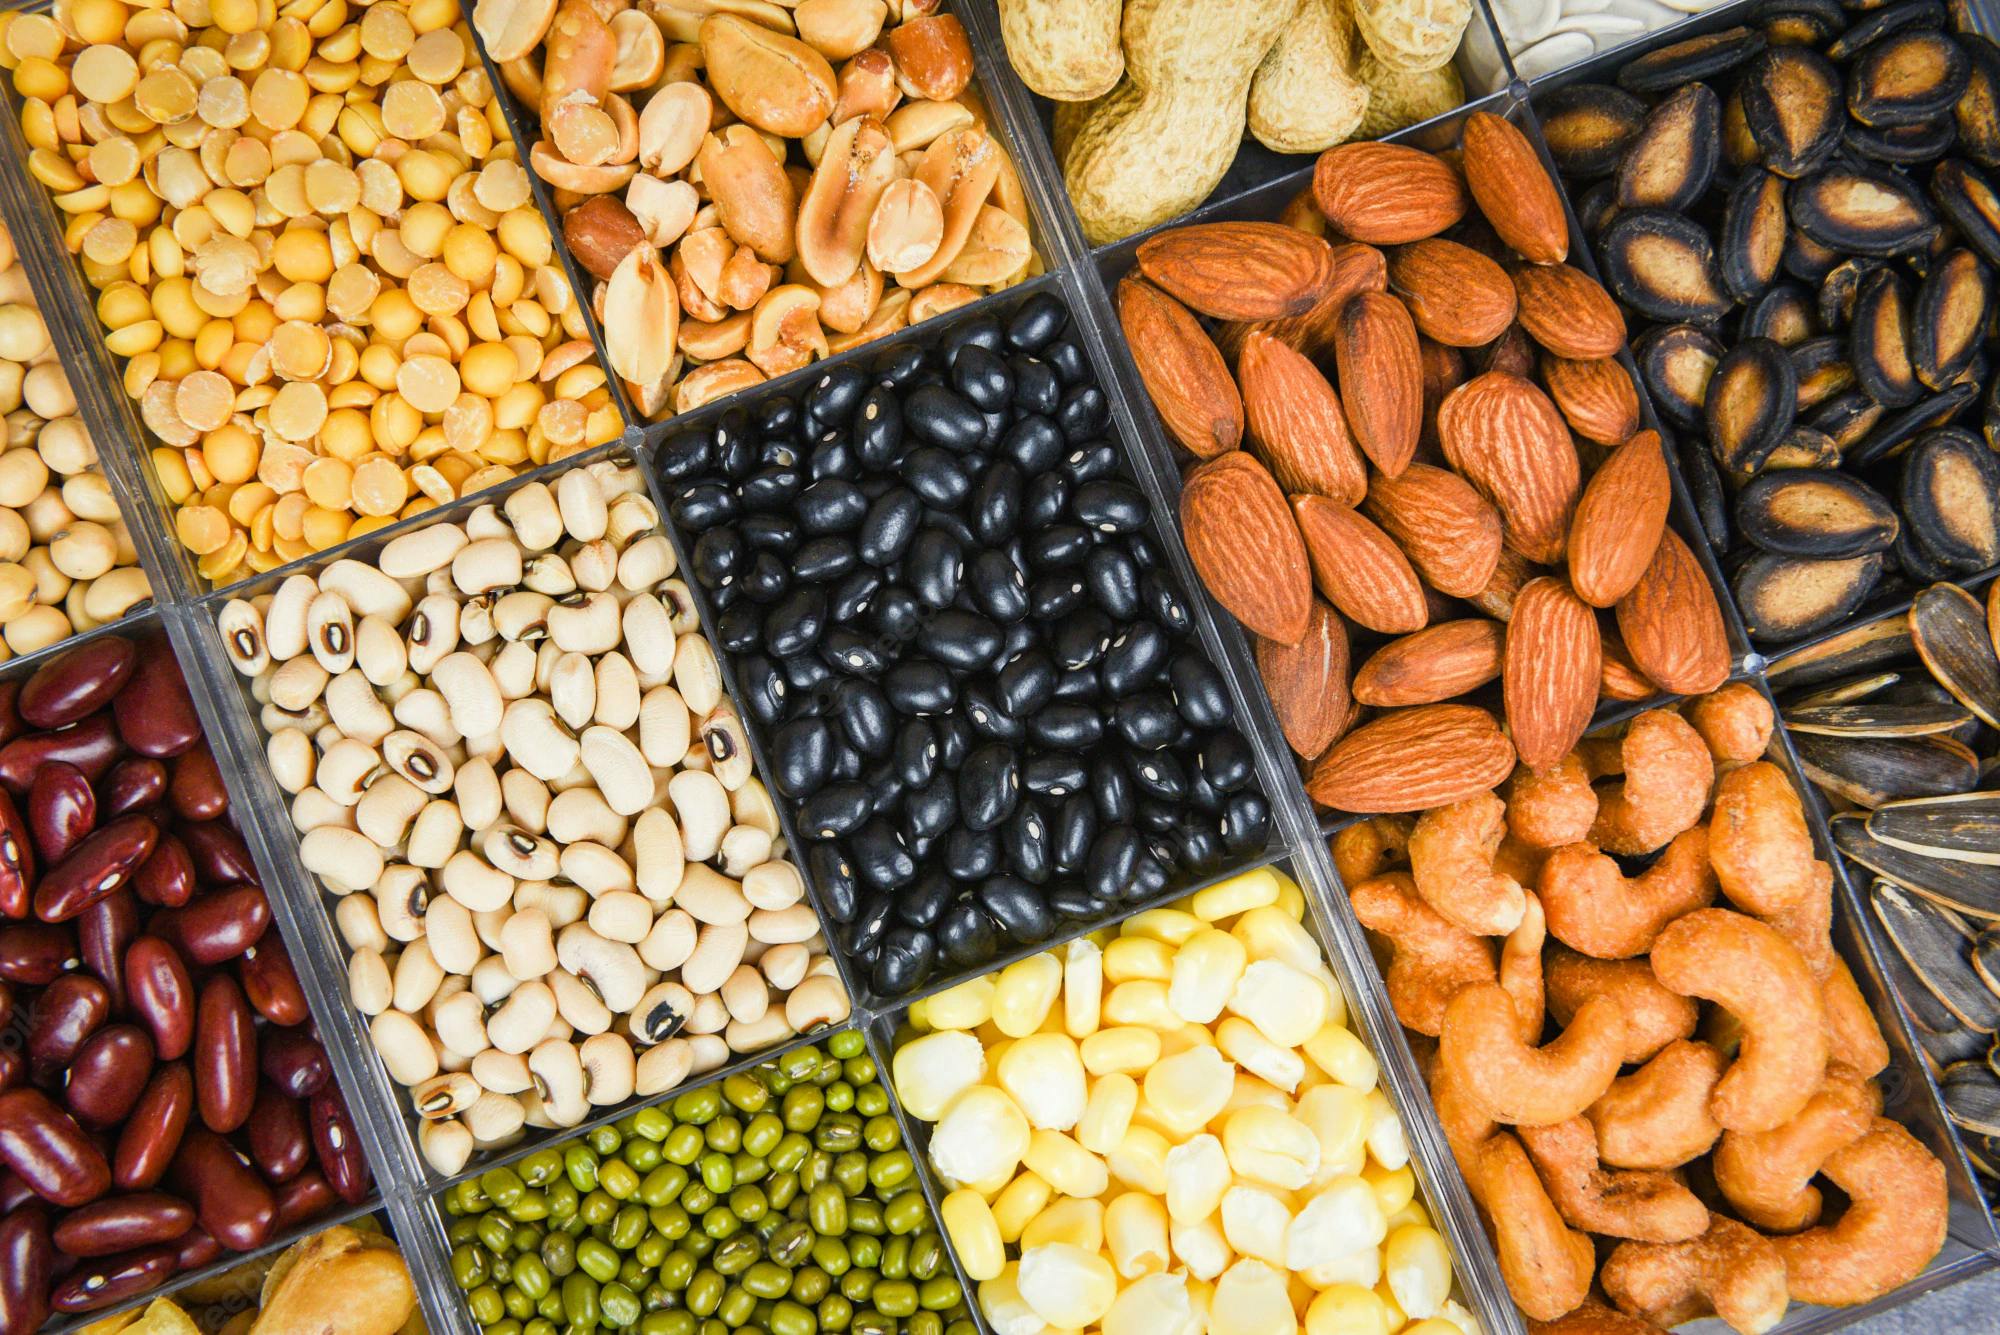 Nuts, Beans, Legumes & Seeds